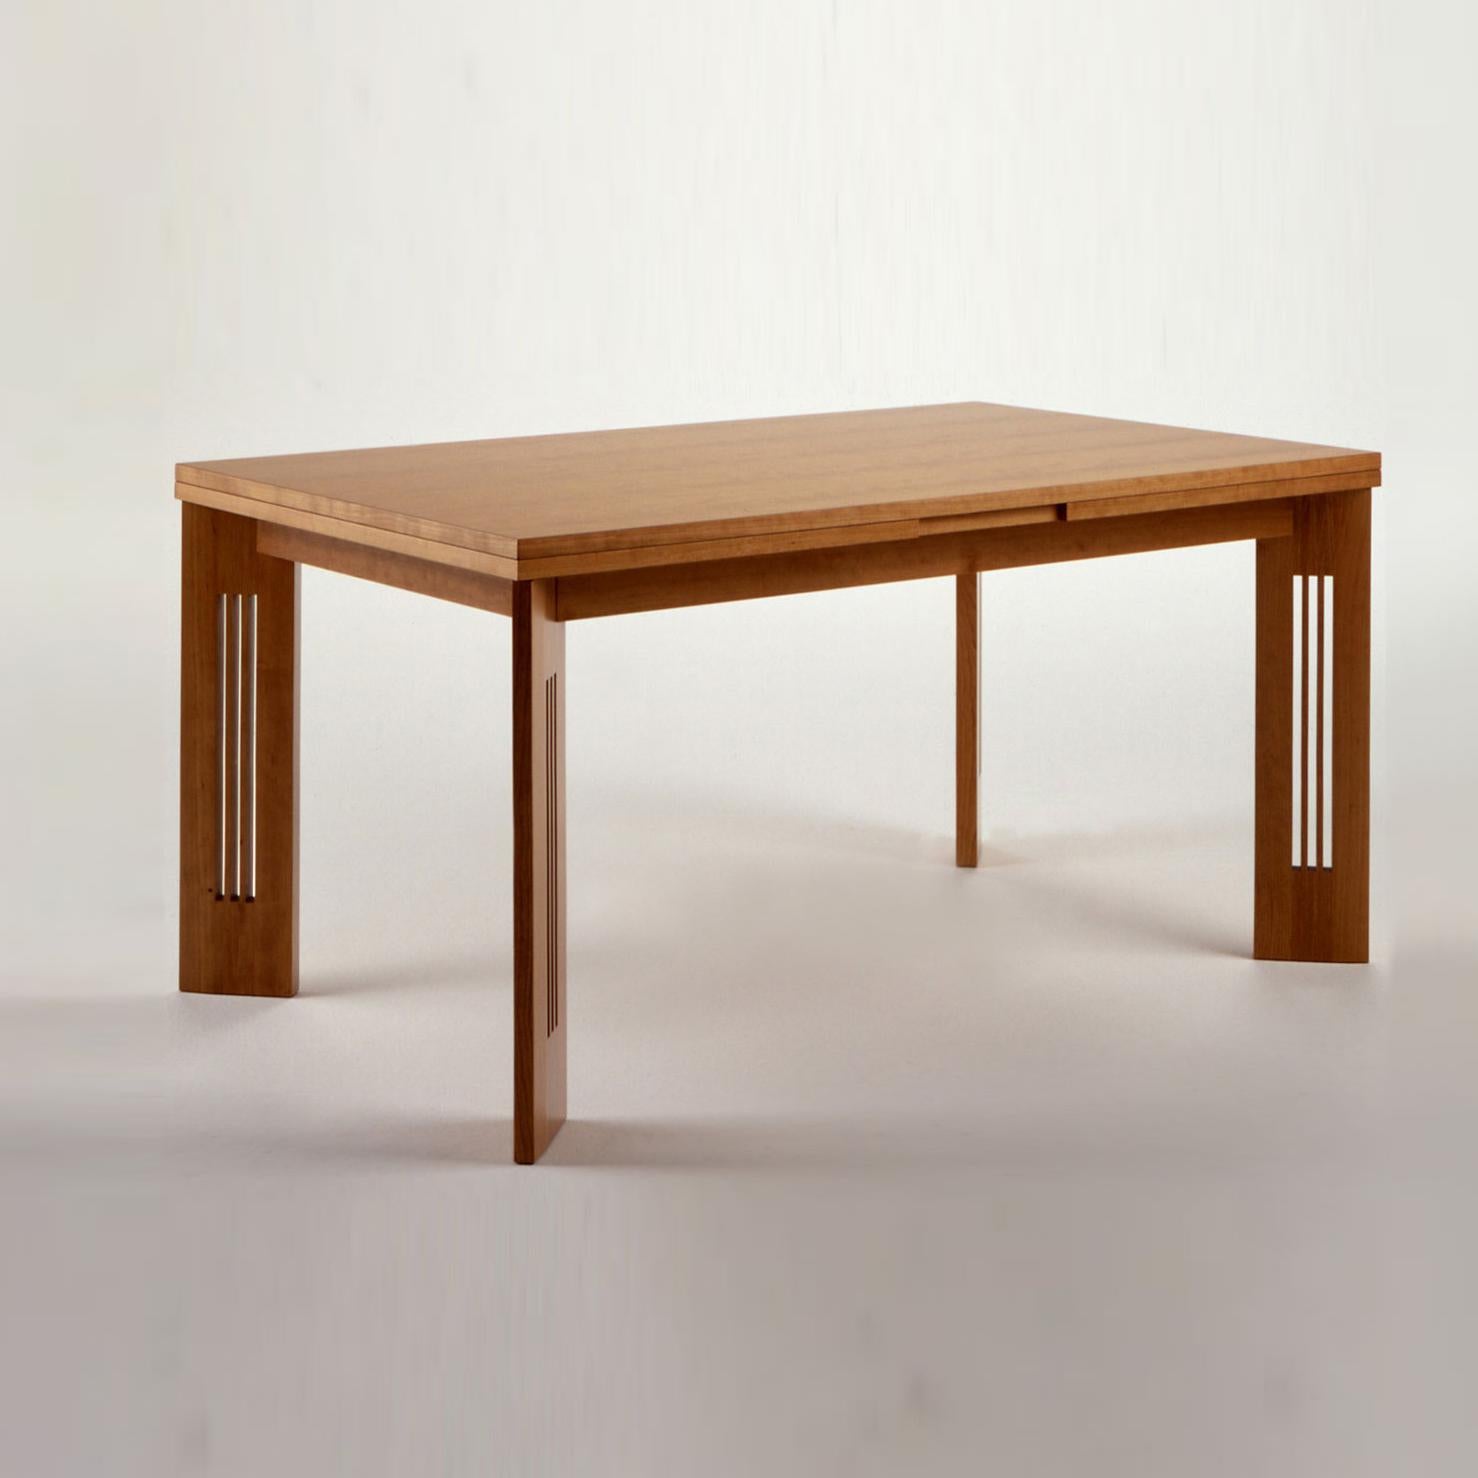 Extendable table designed by Charles Rennie Mackintosh in 1905. Relaunched in 1996.
Manufactured by Cassina in Italy.

An extendable table, exemplifying the perfect balance between Classic and contemporary, designed by Charles Rennie Mackintosh